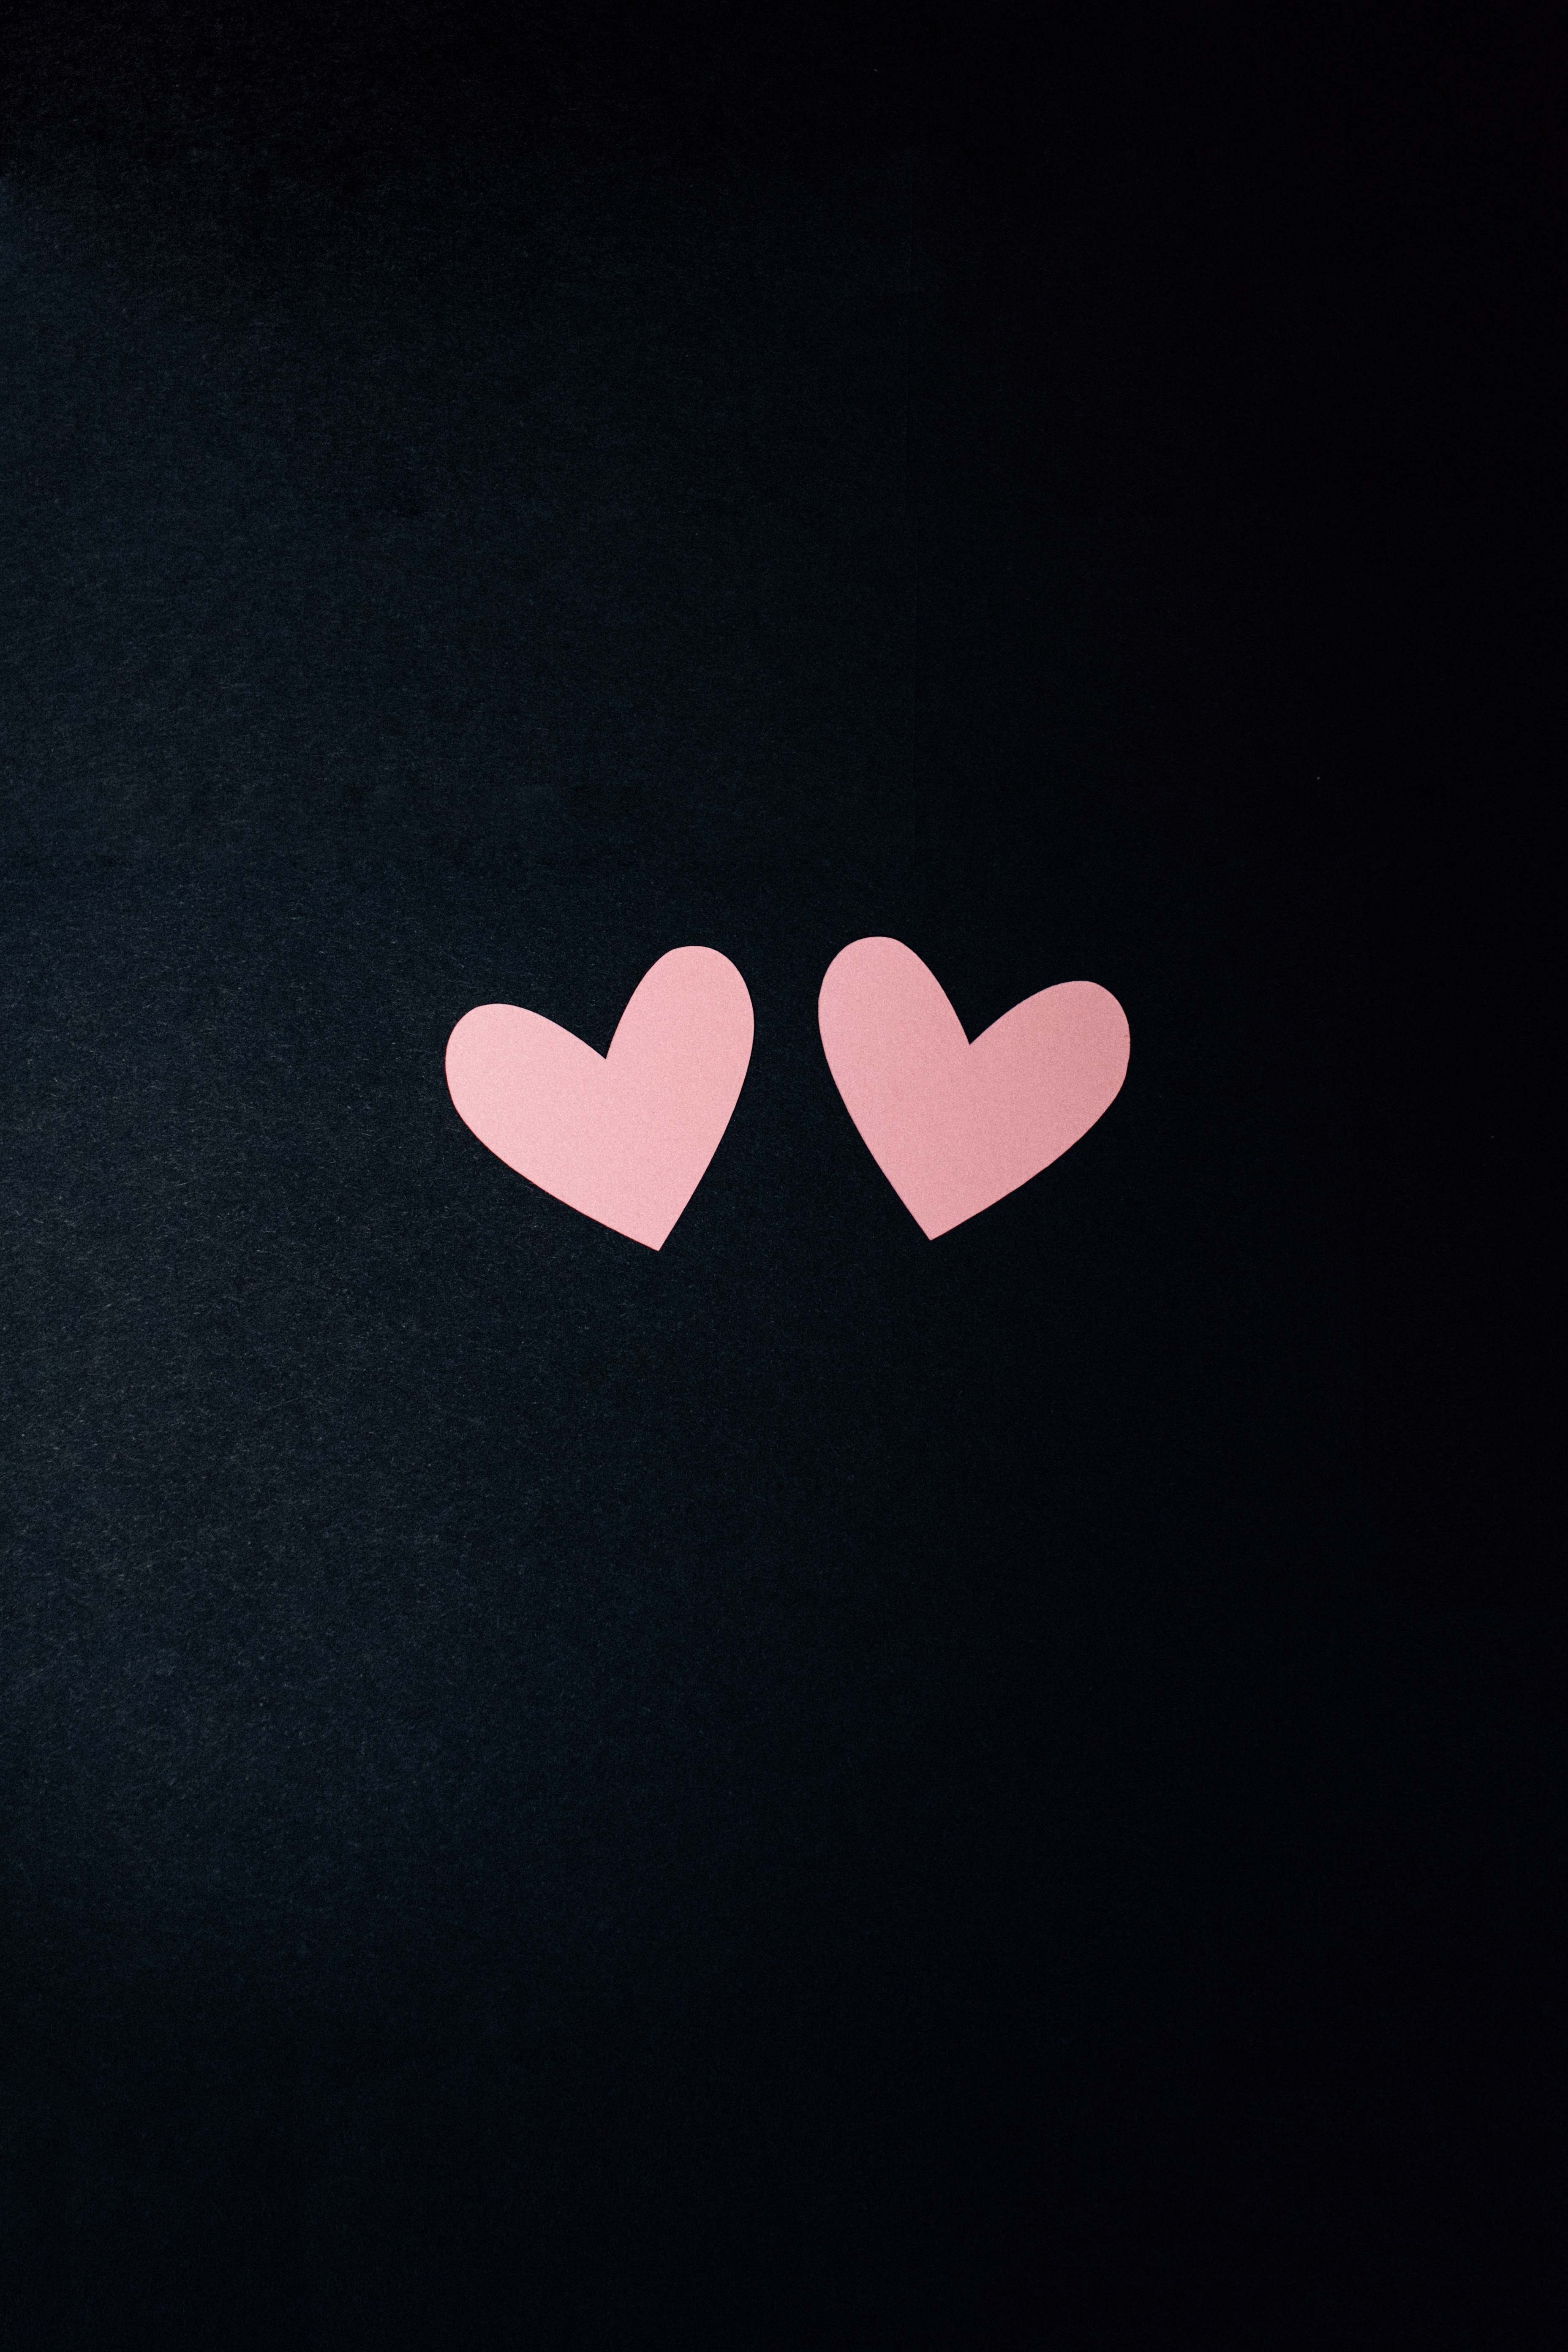 Download Hearts wallpaper for mobile phone, free Hearts HD picture